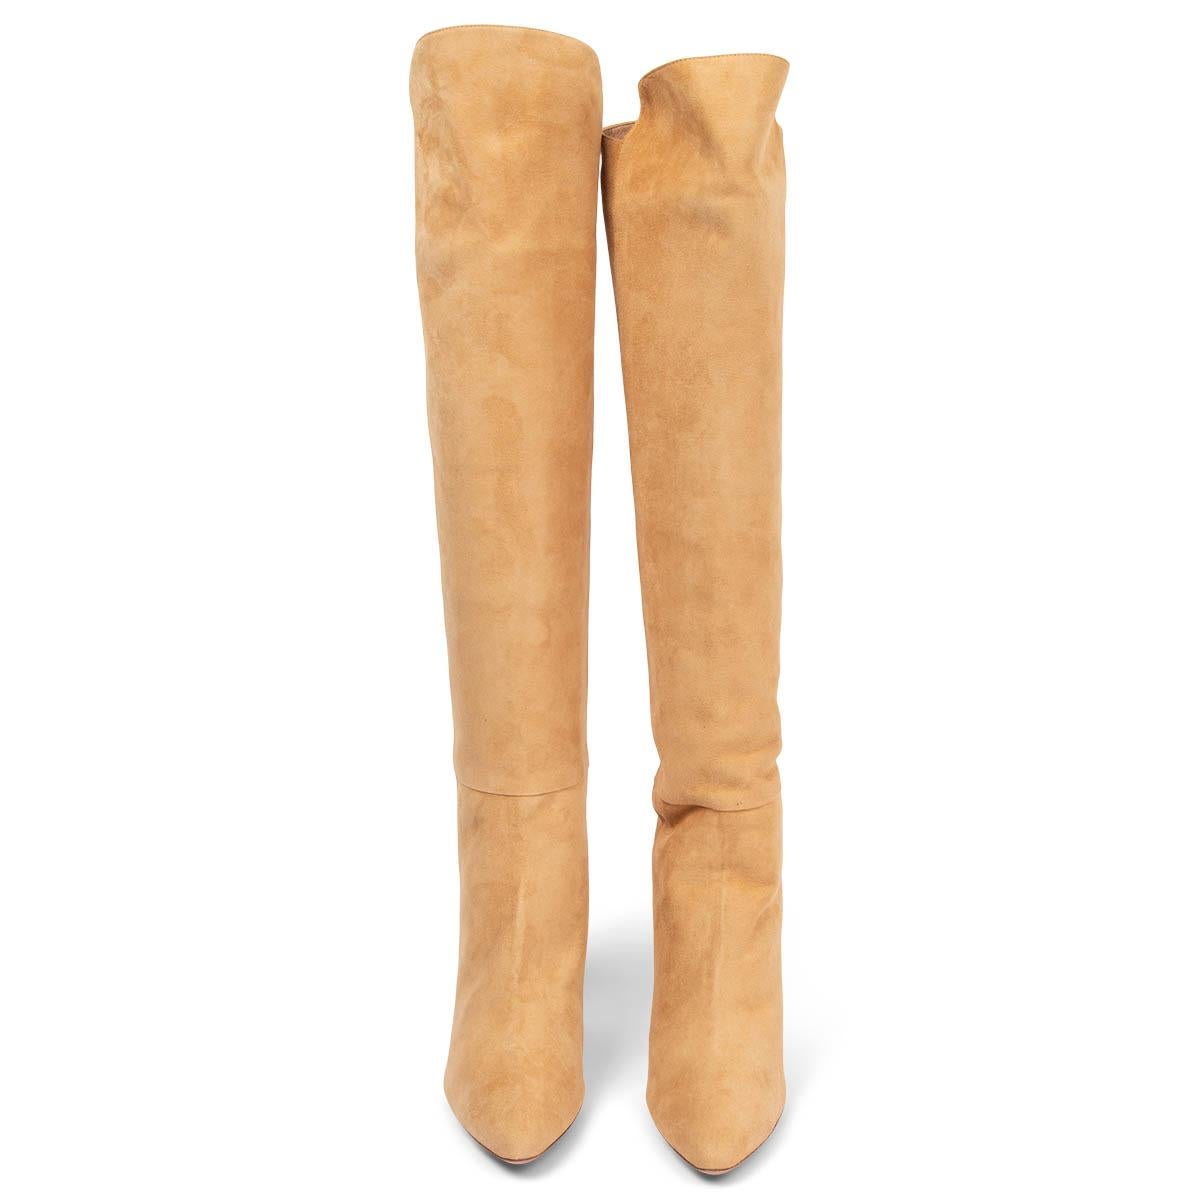 100% authentic Aquazzura Gainsbourg 85 over-the-knee boots in beige suede with a pointed toe. Brand new. Come with dust bags. 

Measurements
Imprinted Size	41
Shoe Size	41
Inside Sole	28cm (10.9in)
Width	8cm (3.1in)
Heel	8.5cm (3.3in)
Shaft	57cm